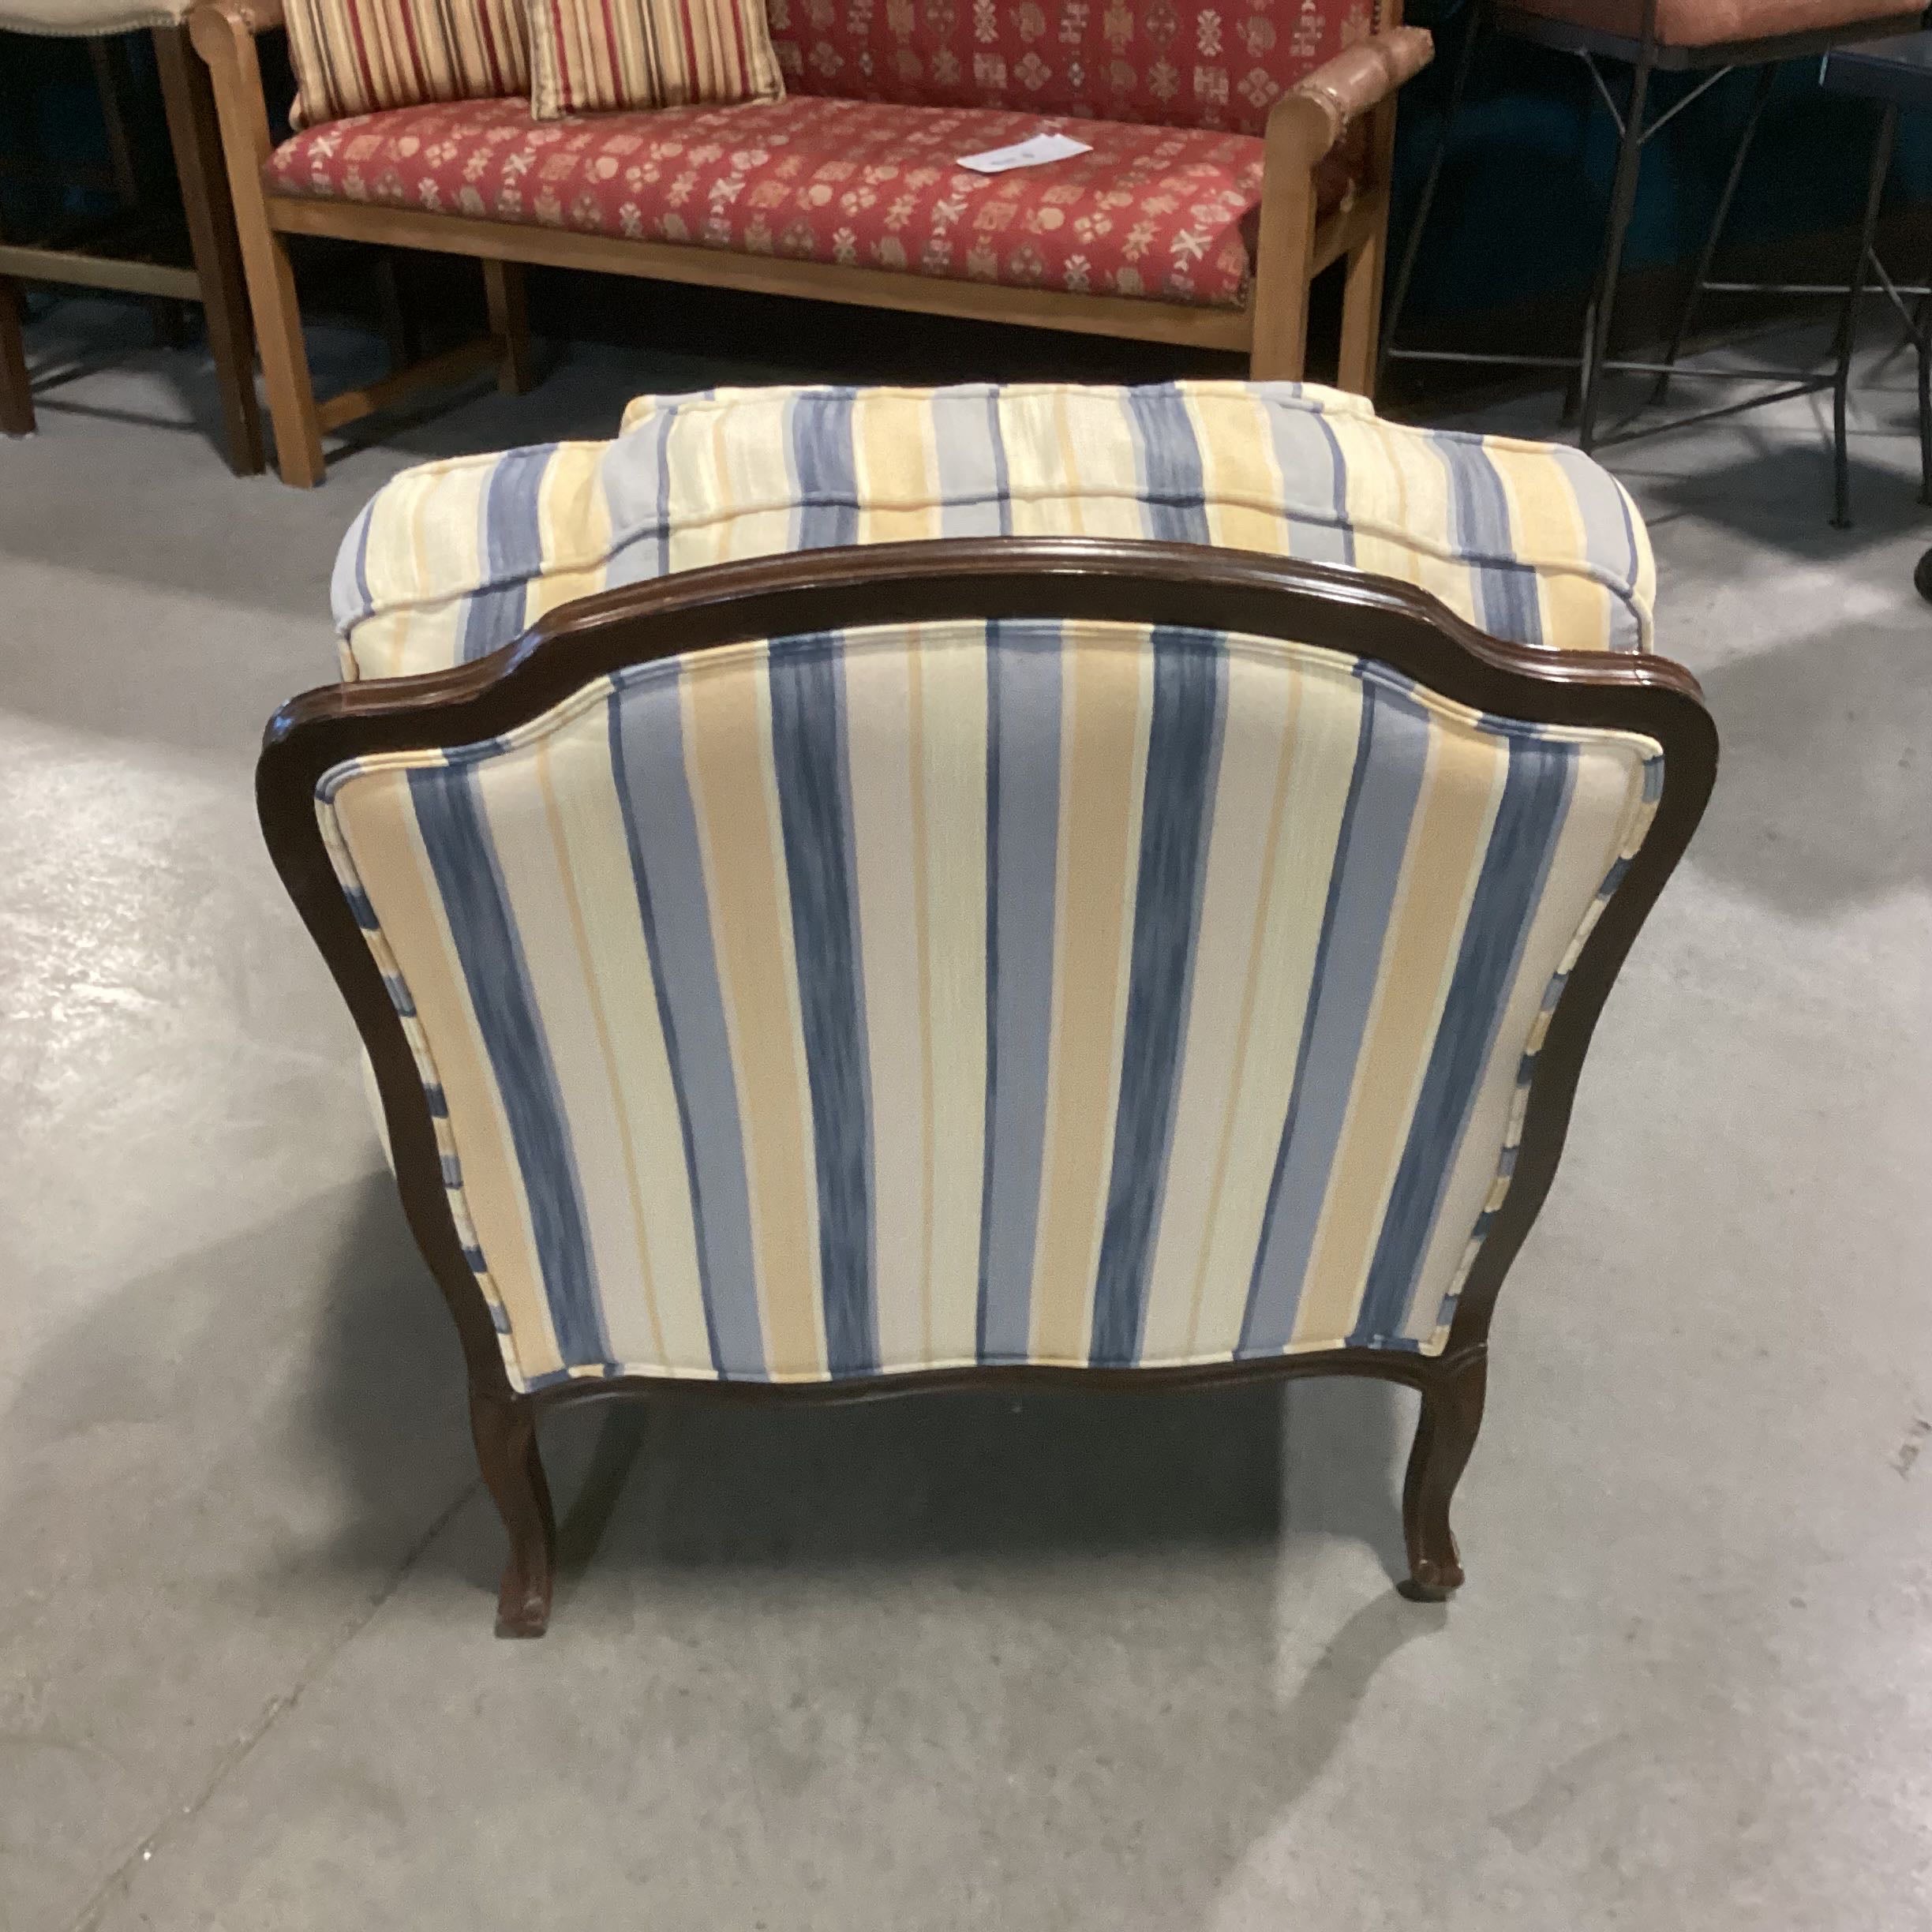 Ethan Allen French Provincial Carved Wood Blue Wheat Stripe Chair